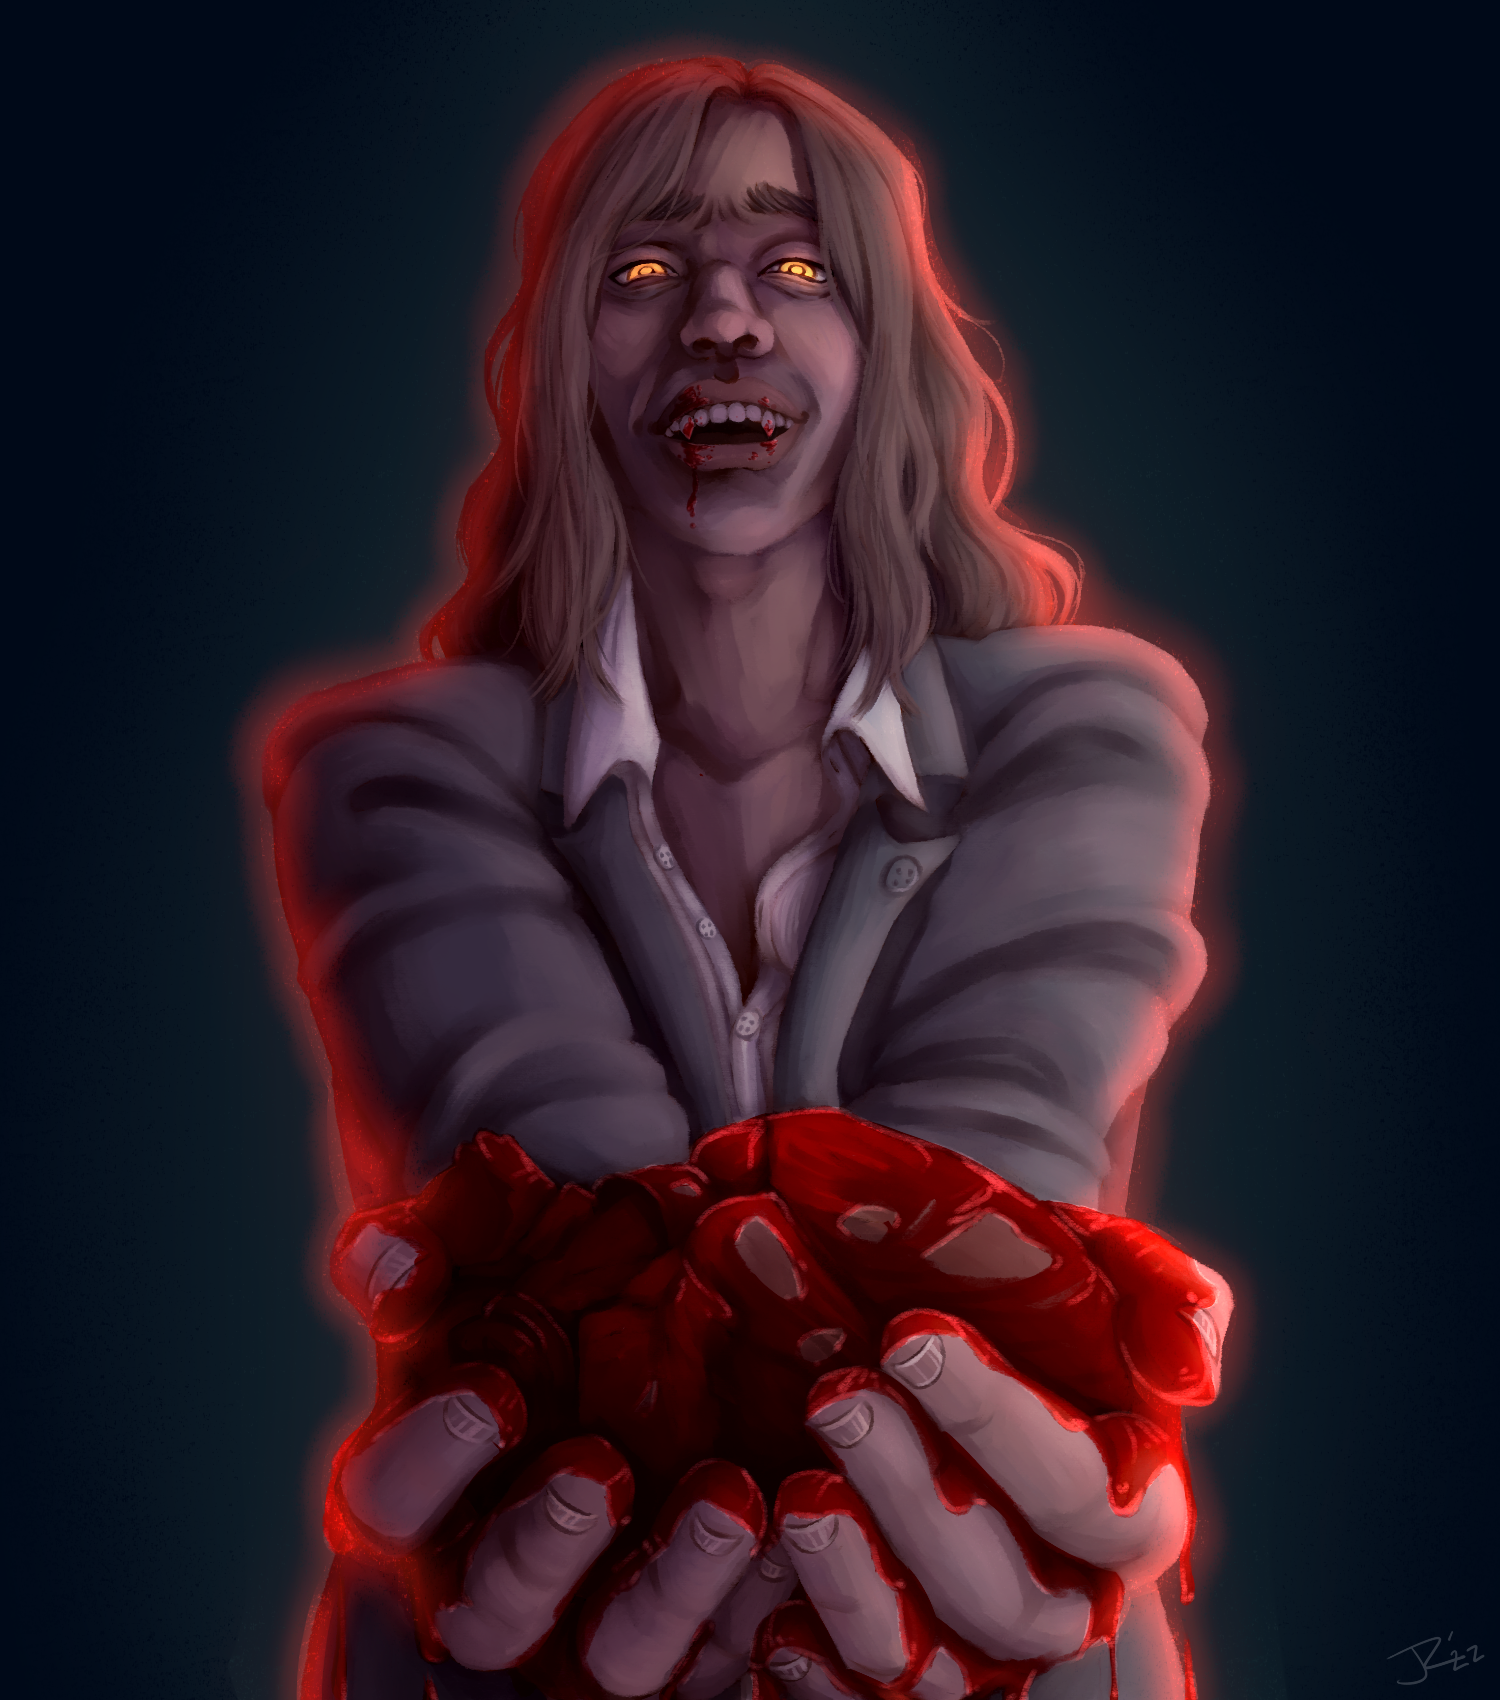 A waist up painting of Mr.Damp from VtM:Bloodlines 2. He's a mid-twenties white vampire with shoulder-length light brown hair, and glowing golden eyes. He wears a white dress shirt with the collar undone, and a grey suit jacket. He's grinning while holding a human heart out to the viewer, and blood drips down his mouth and hands.